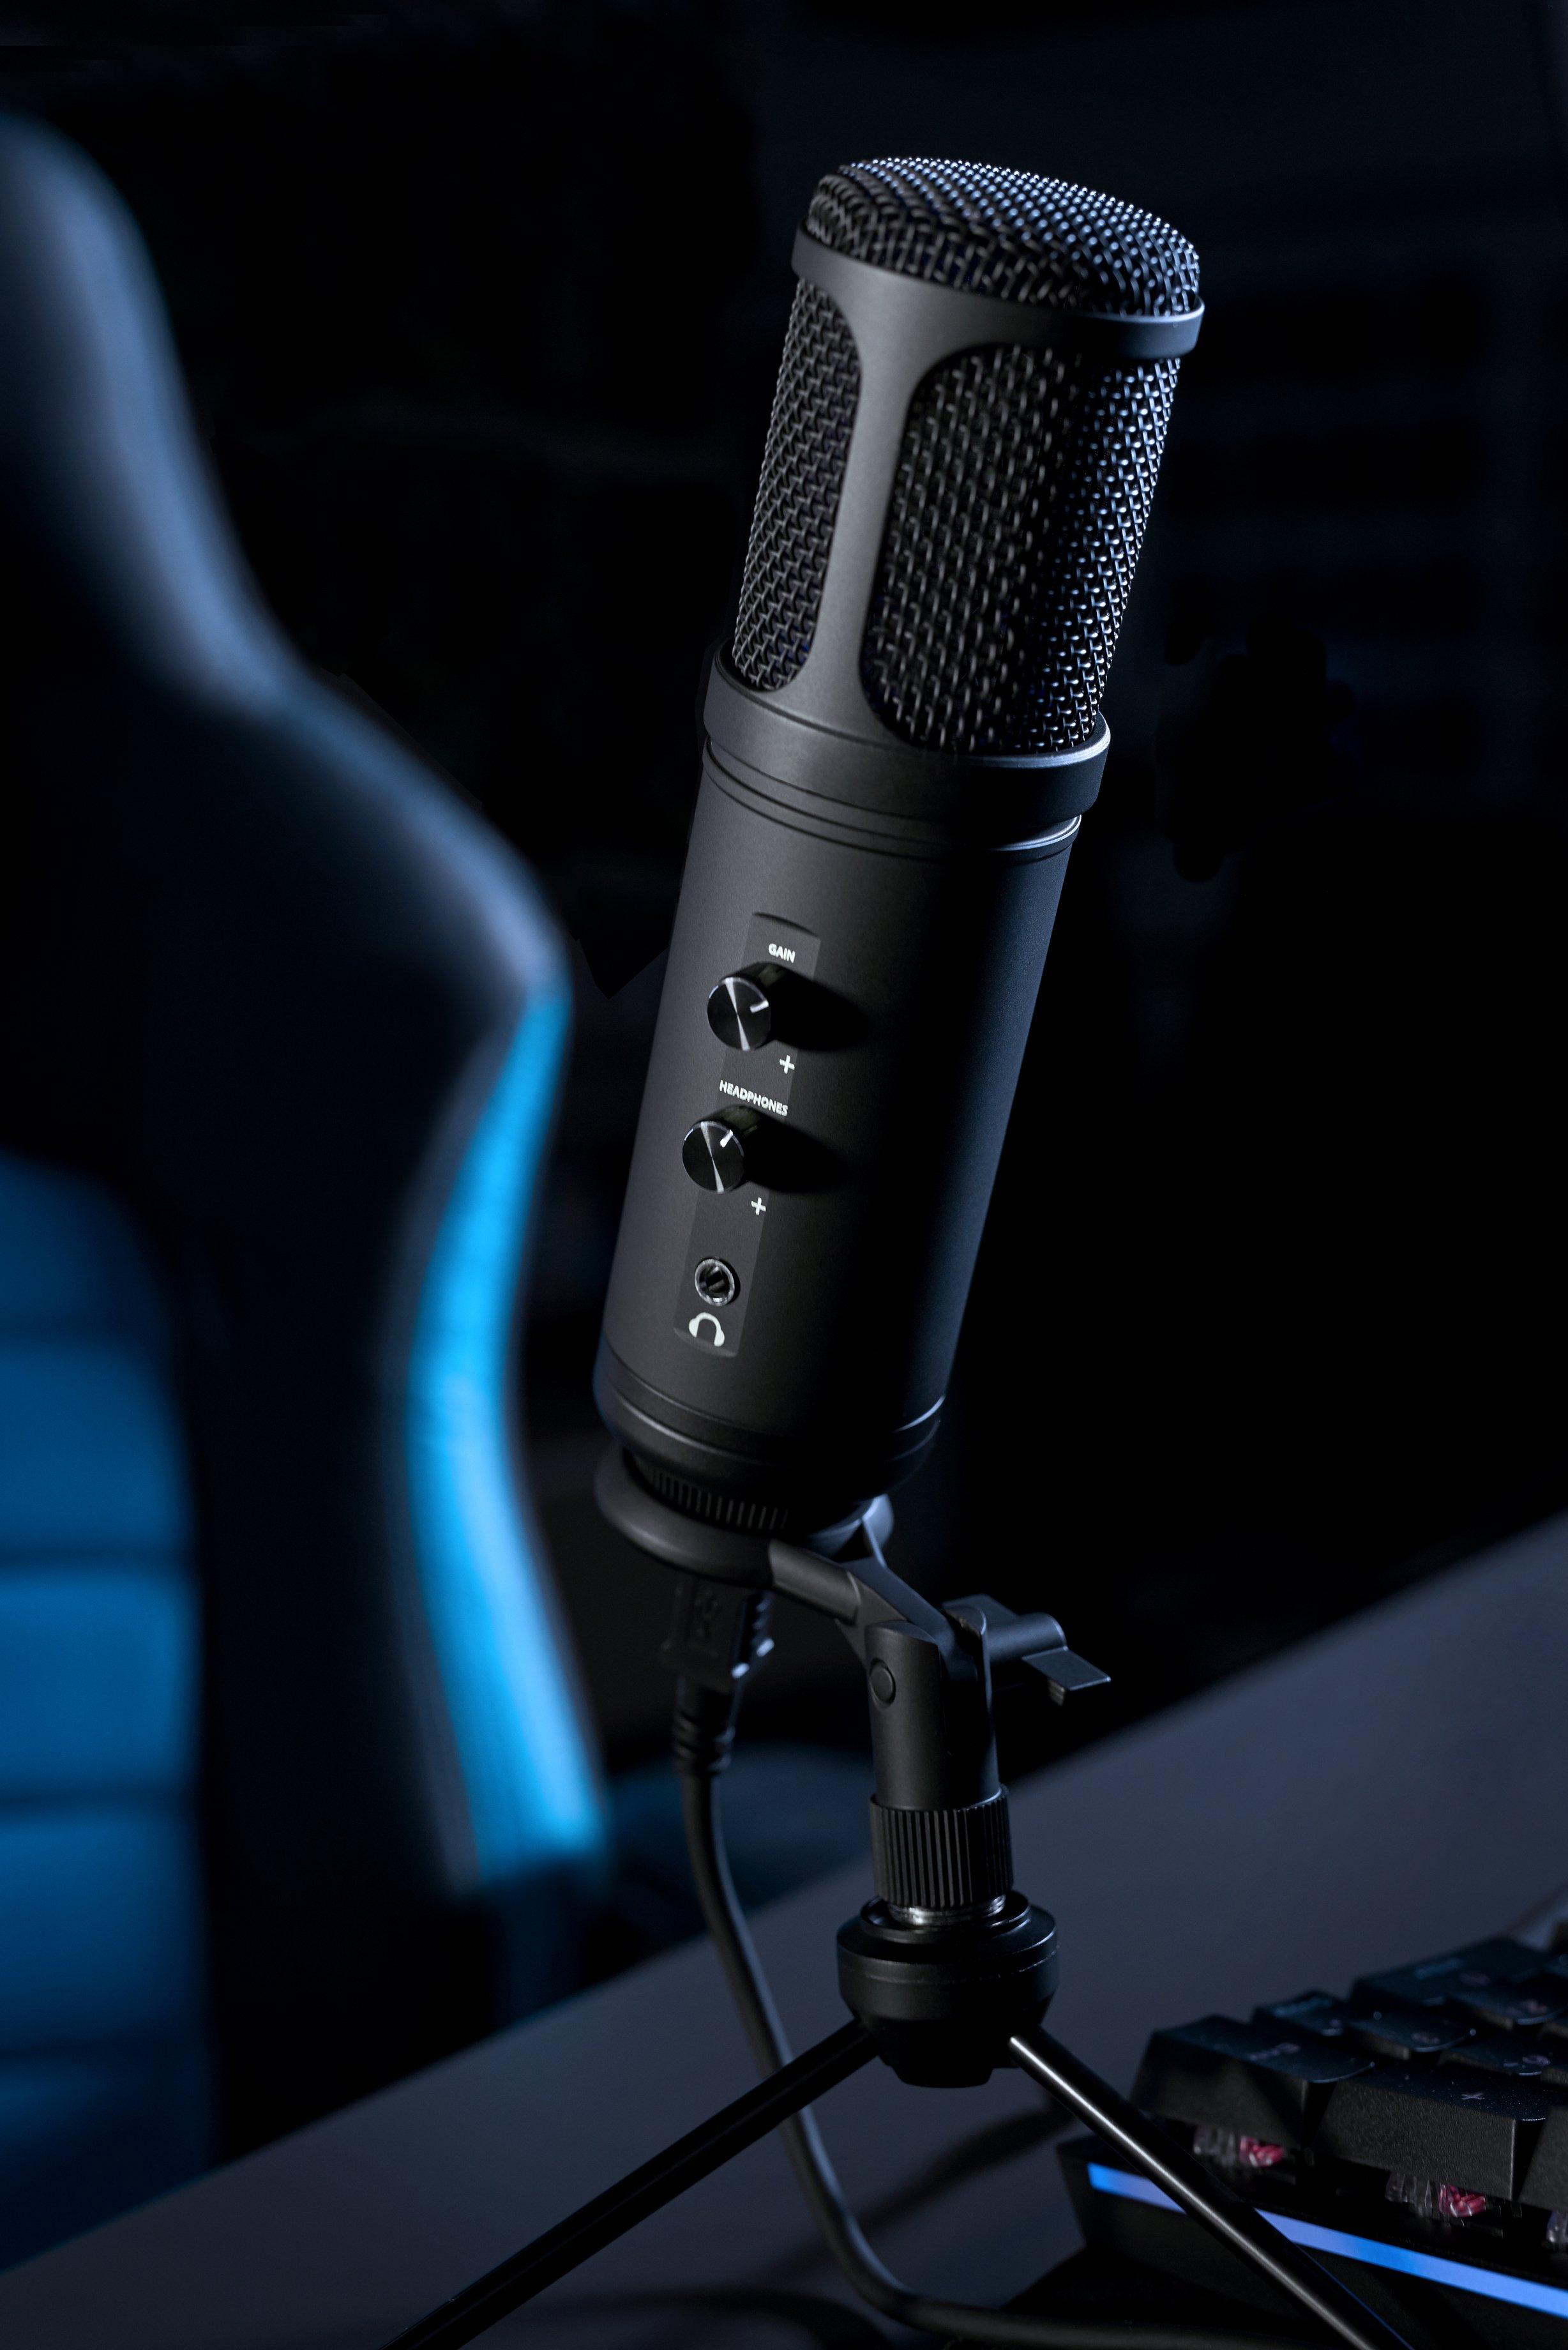 nacon streaming microphone